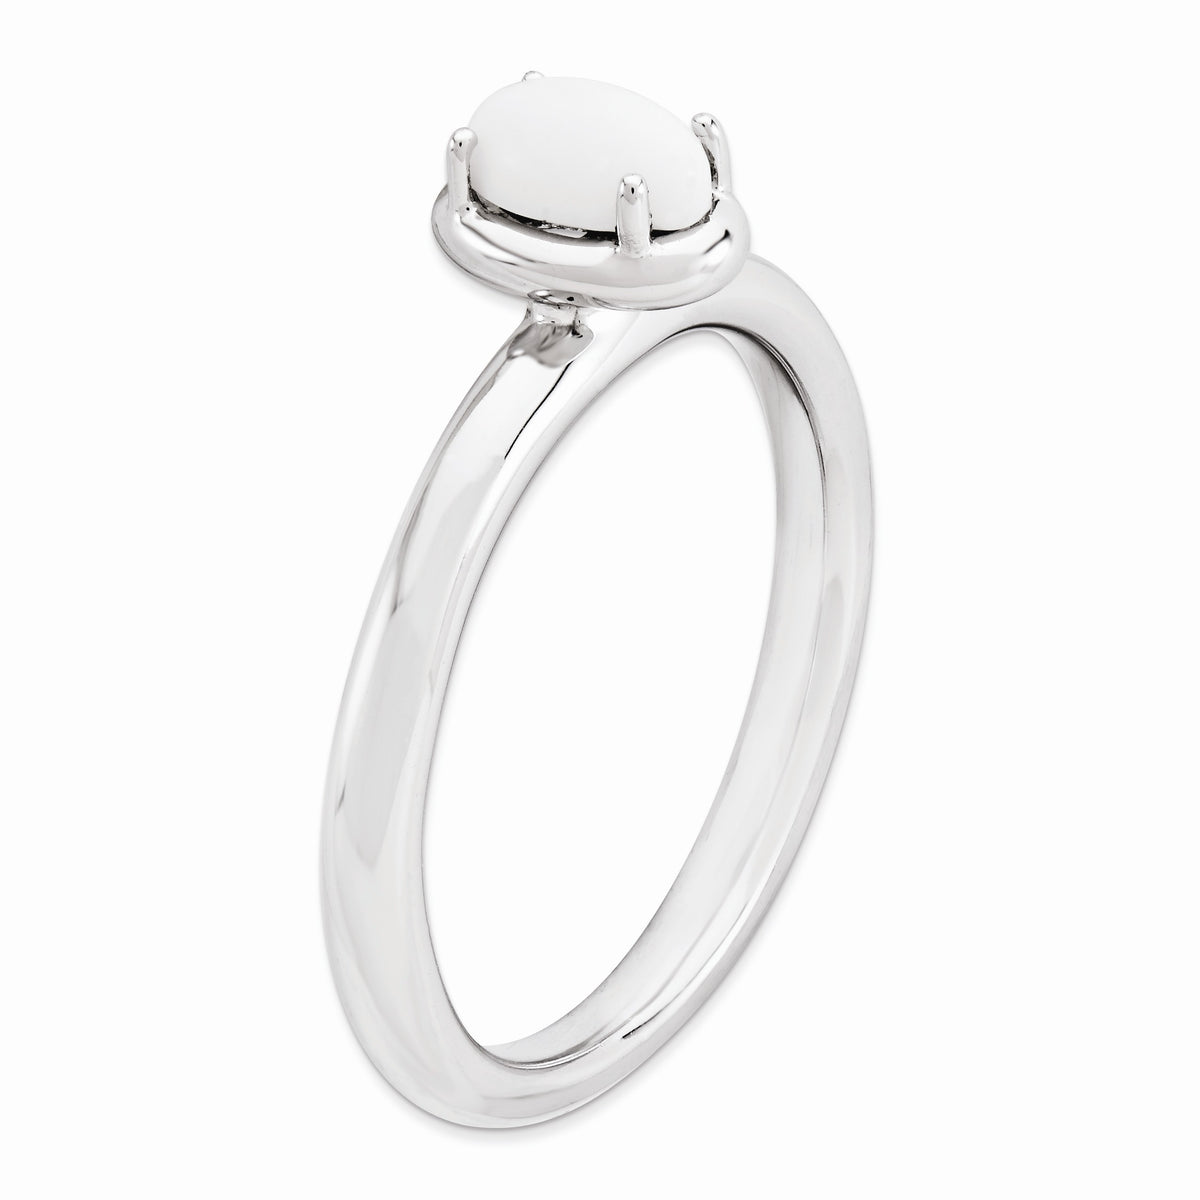 Alternate view of the Sterling Silver Stackable White Agate Ring by The Black Bow Jewelry Co.